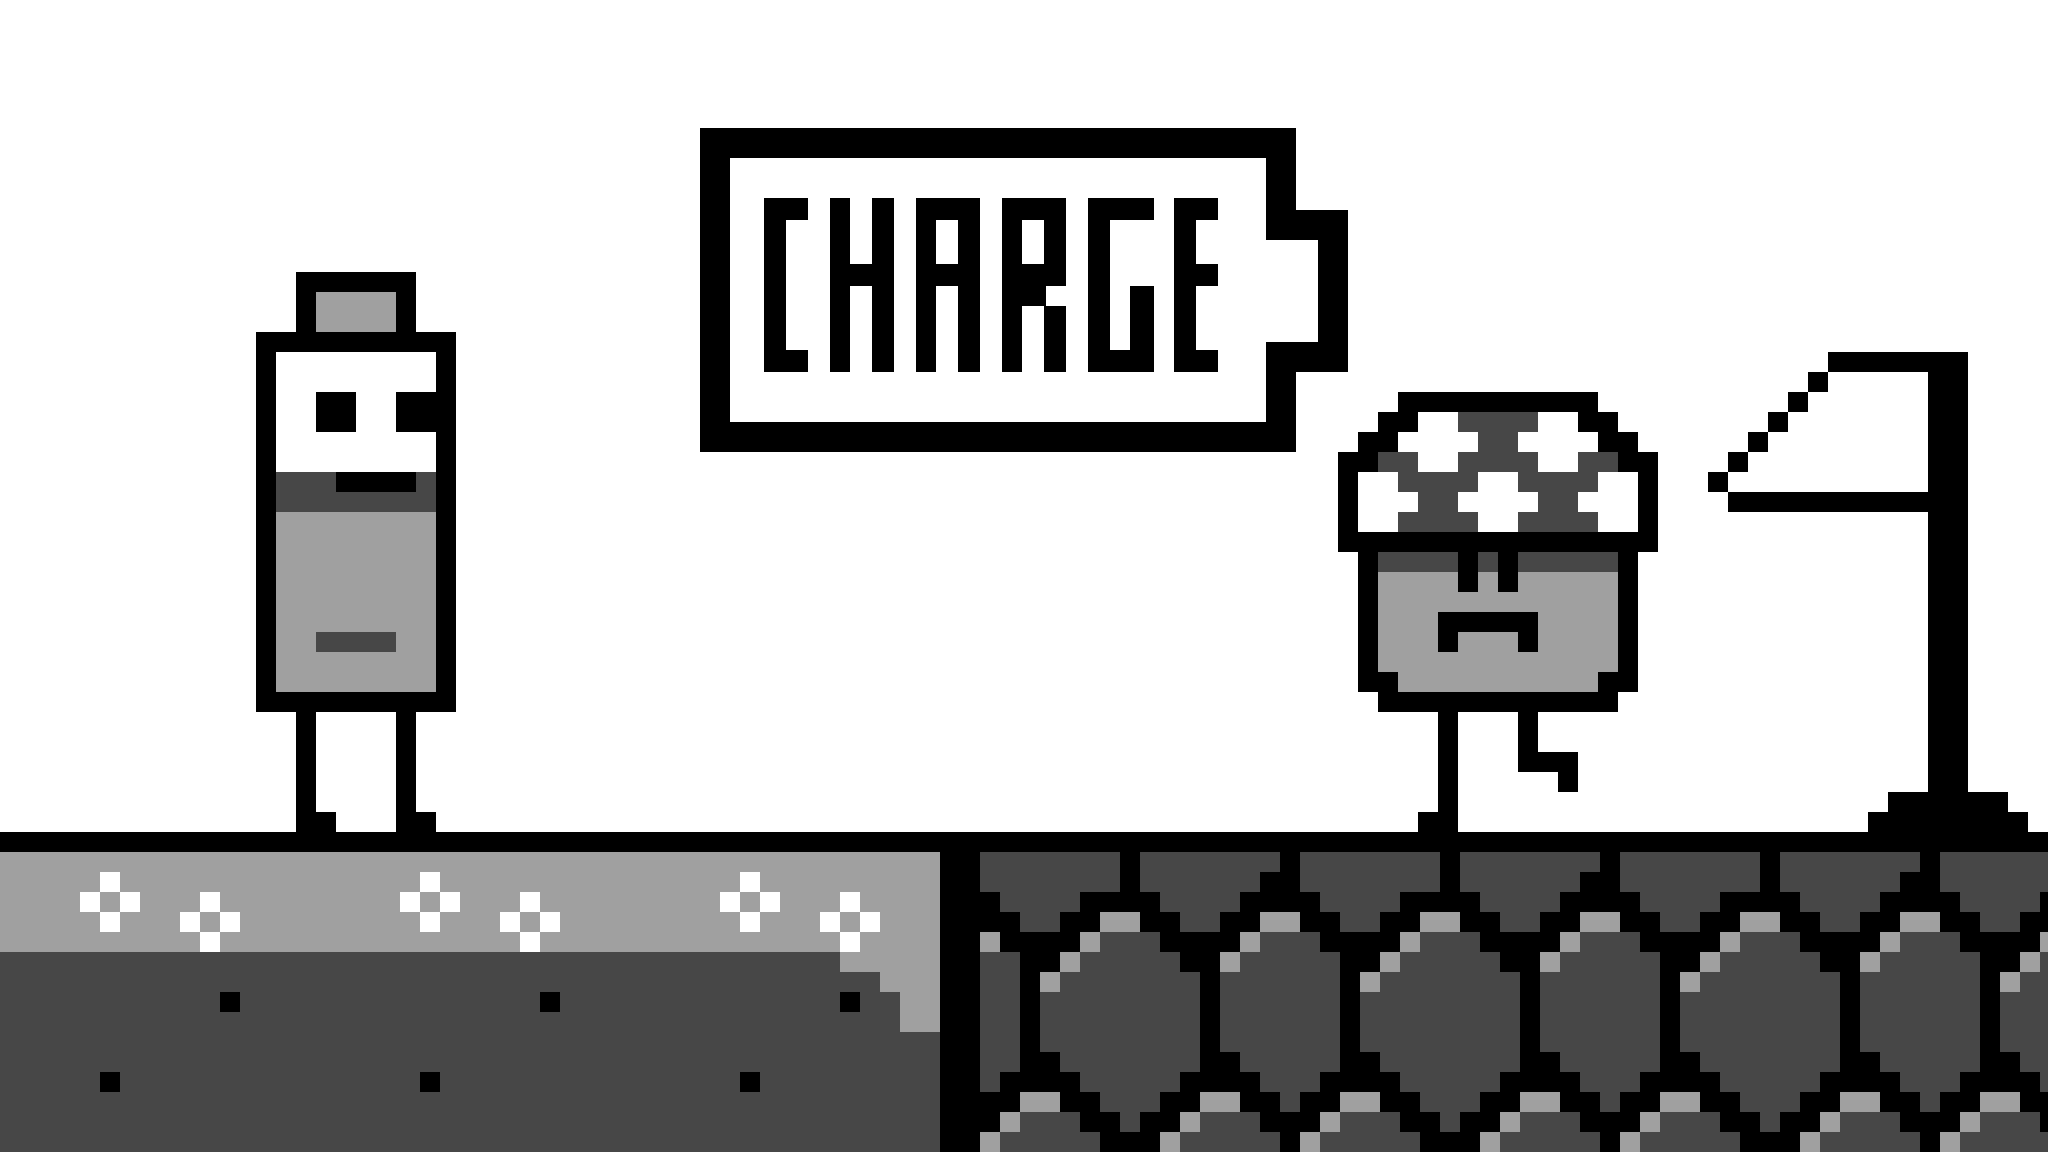 Banner for CHARGE